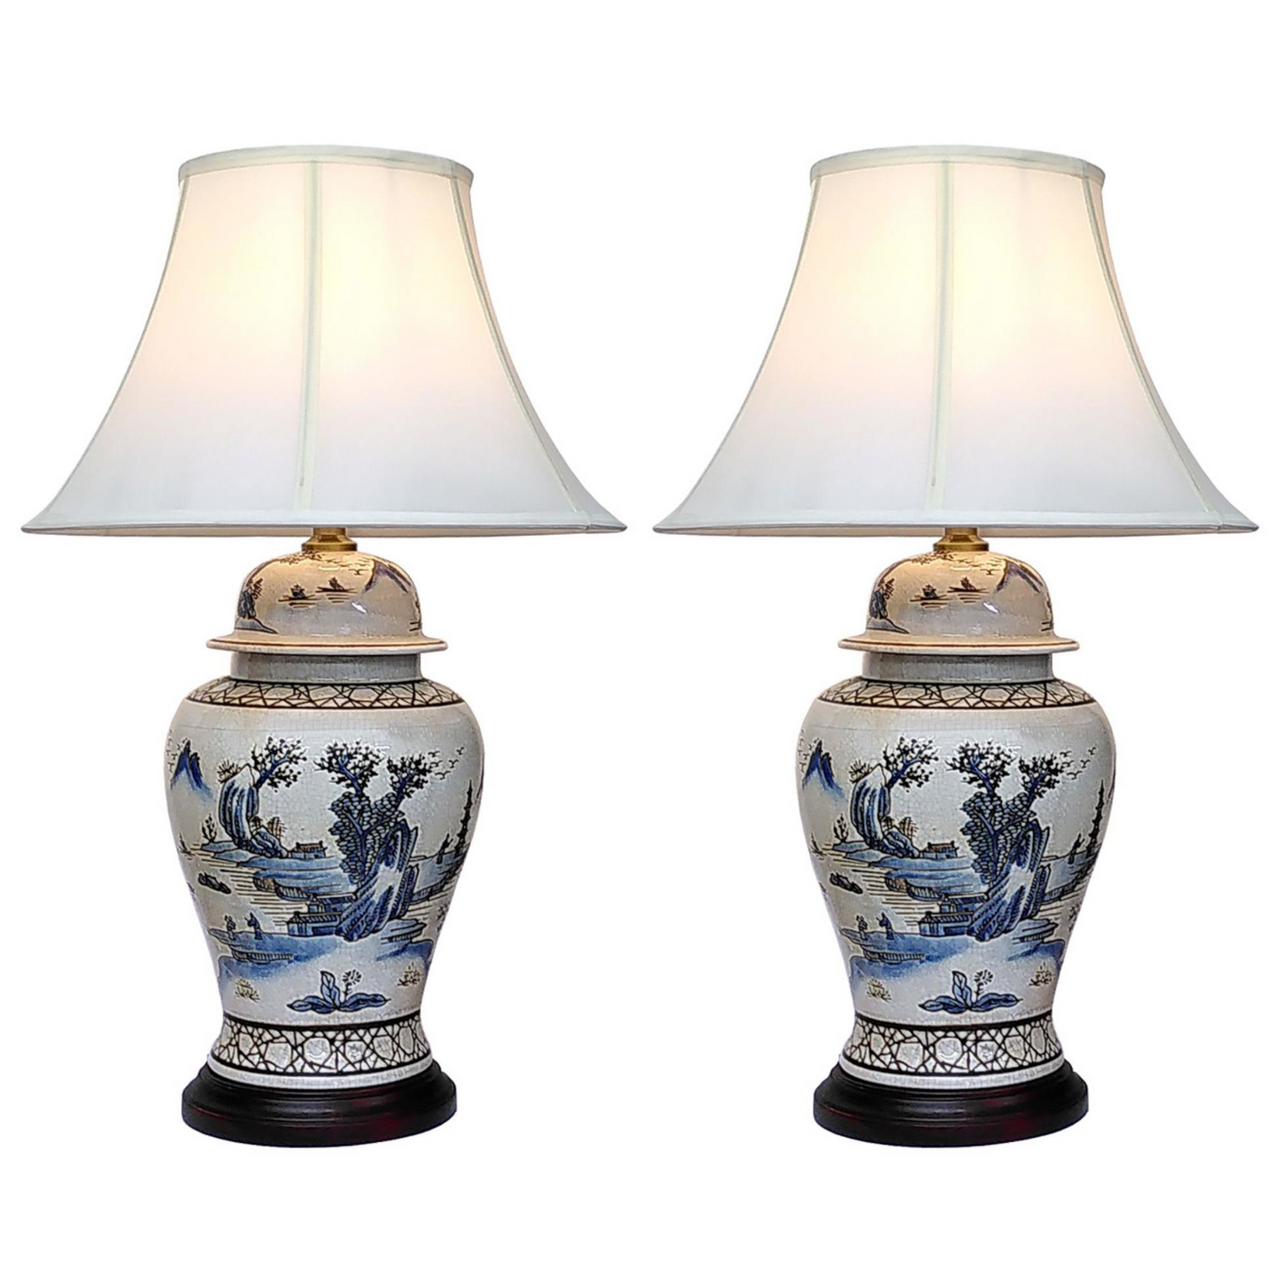 Pair of Chinese Ceramic Jar Lamps with Shades - Ancient Landscape - 64cm